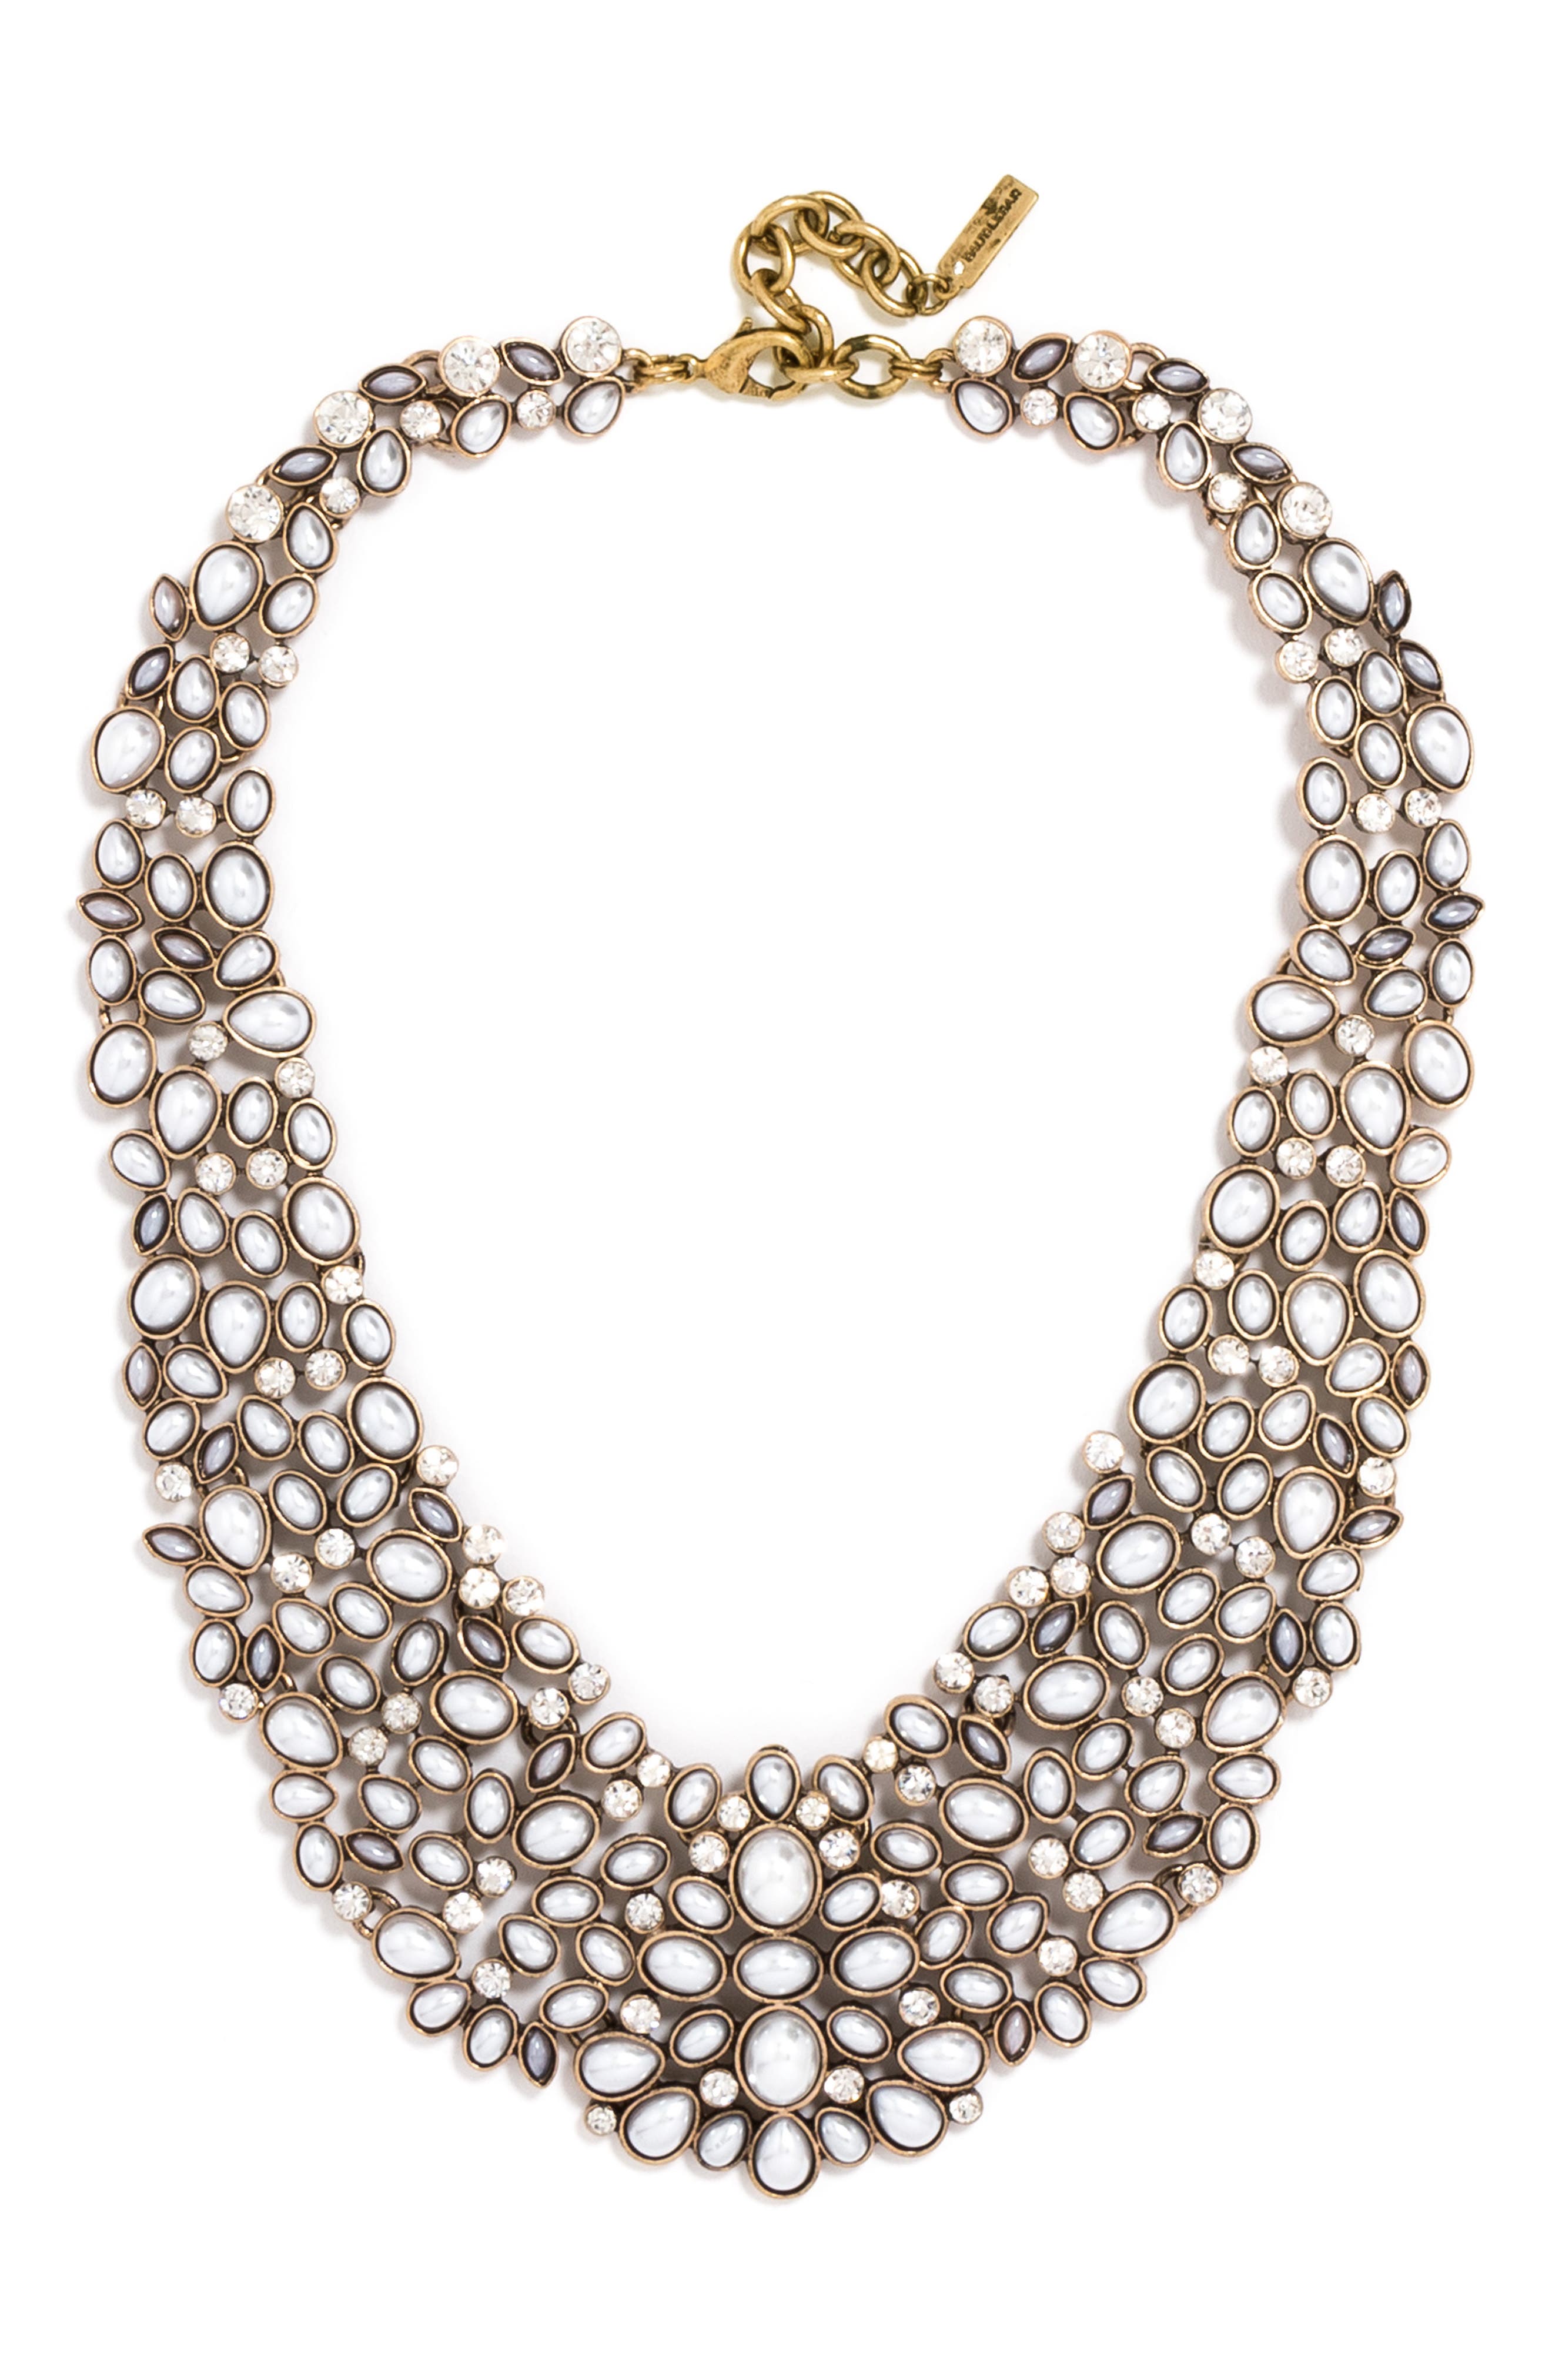 Collar  Bib Necklace Chunky Style Big Statement Necklace in Gold or Silver 